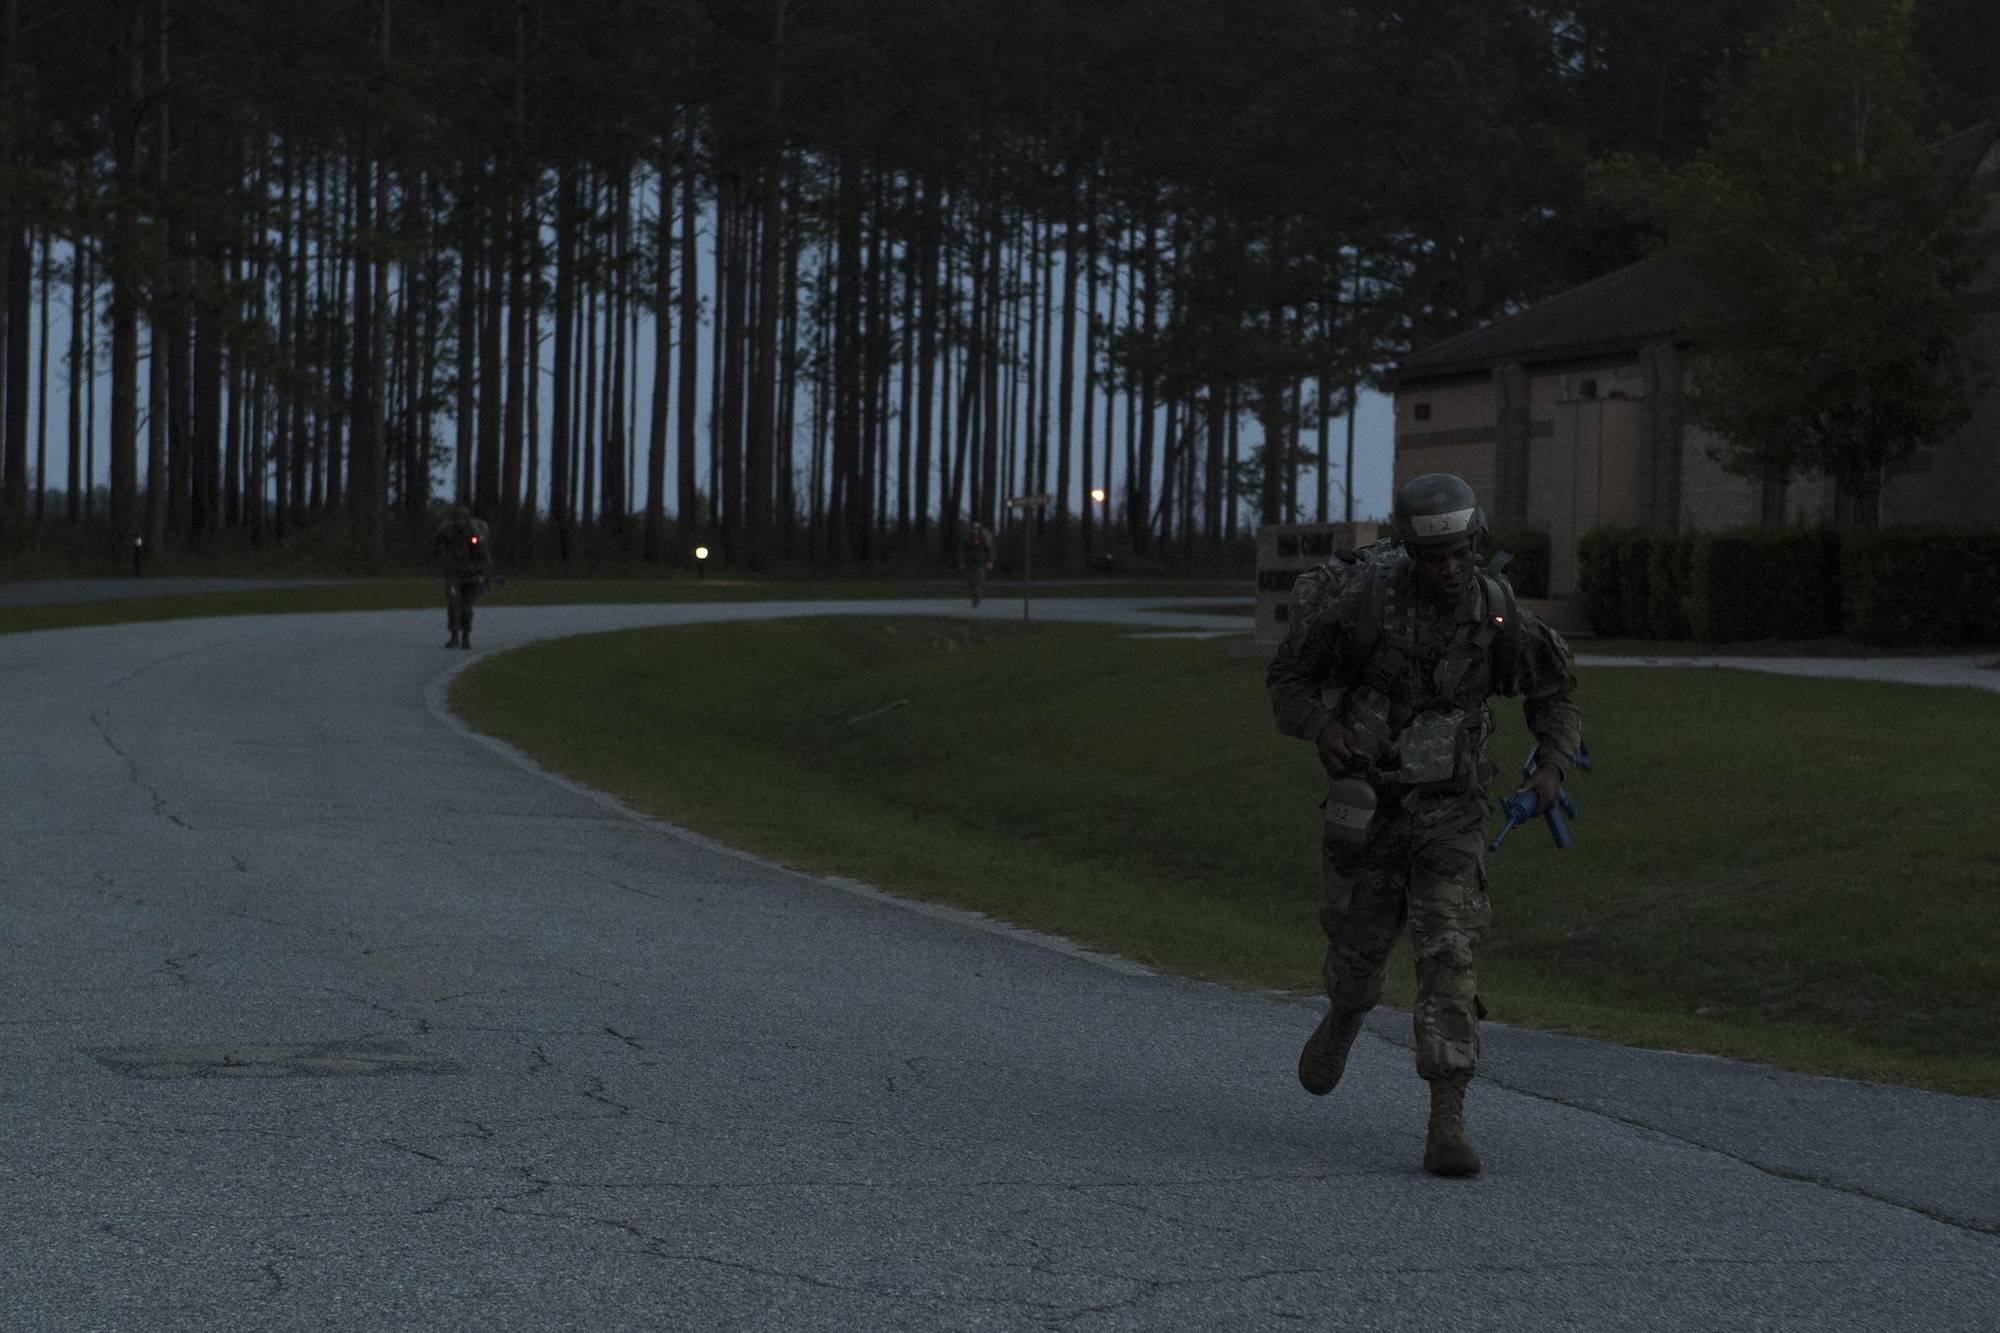 Airman 1st Class Robert Moses, 822nd Base Defense Squadron fire team member, finishes his 12-mile ruck march during an Army Air Assault assessment, May 19, 2017, at Moody Air Force Base, Ga. Twenty-six Airmen attended the assessment which measured candidates’ aptitude in Air Assault operations, completion of equipment layouts, and rappelling. (U.S. Air Force photo by Tech. Sgt. Zachary Wolf)